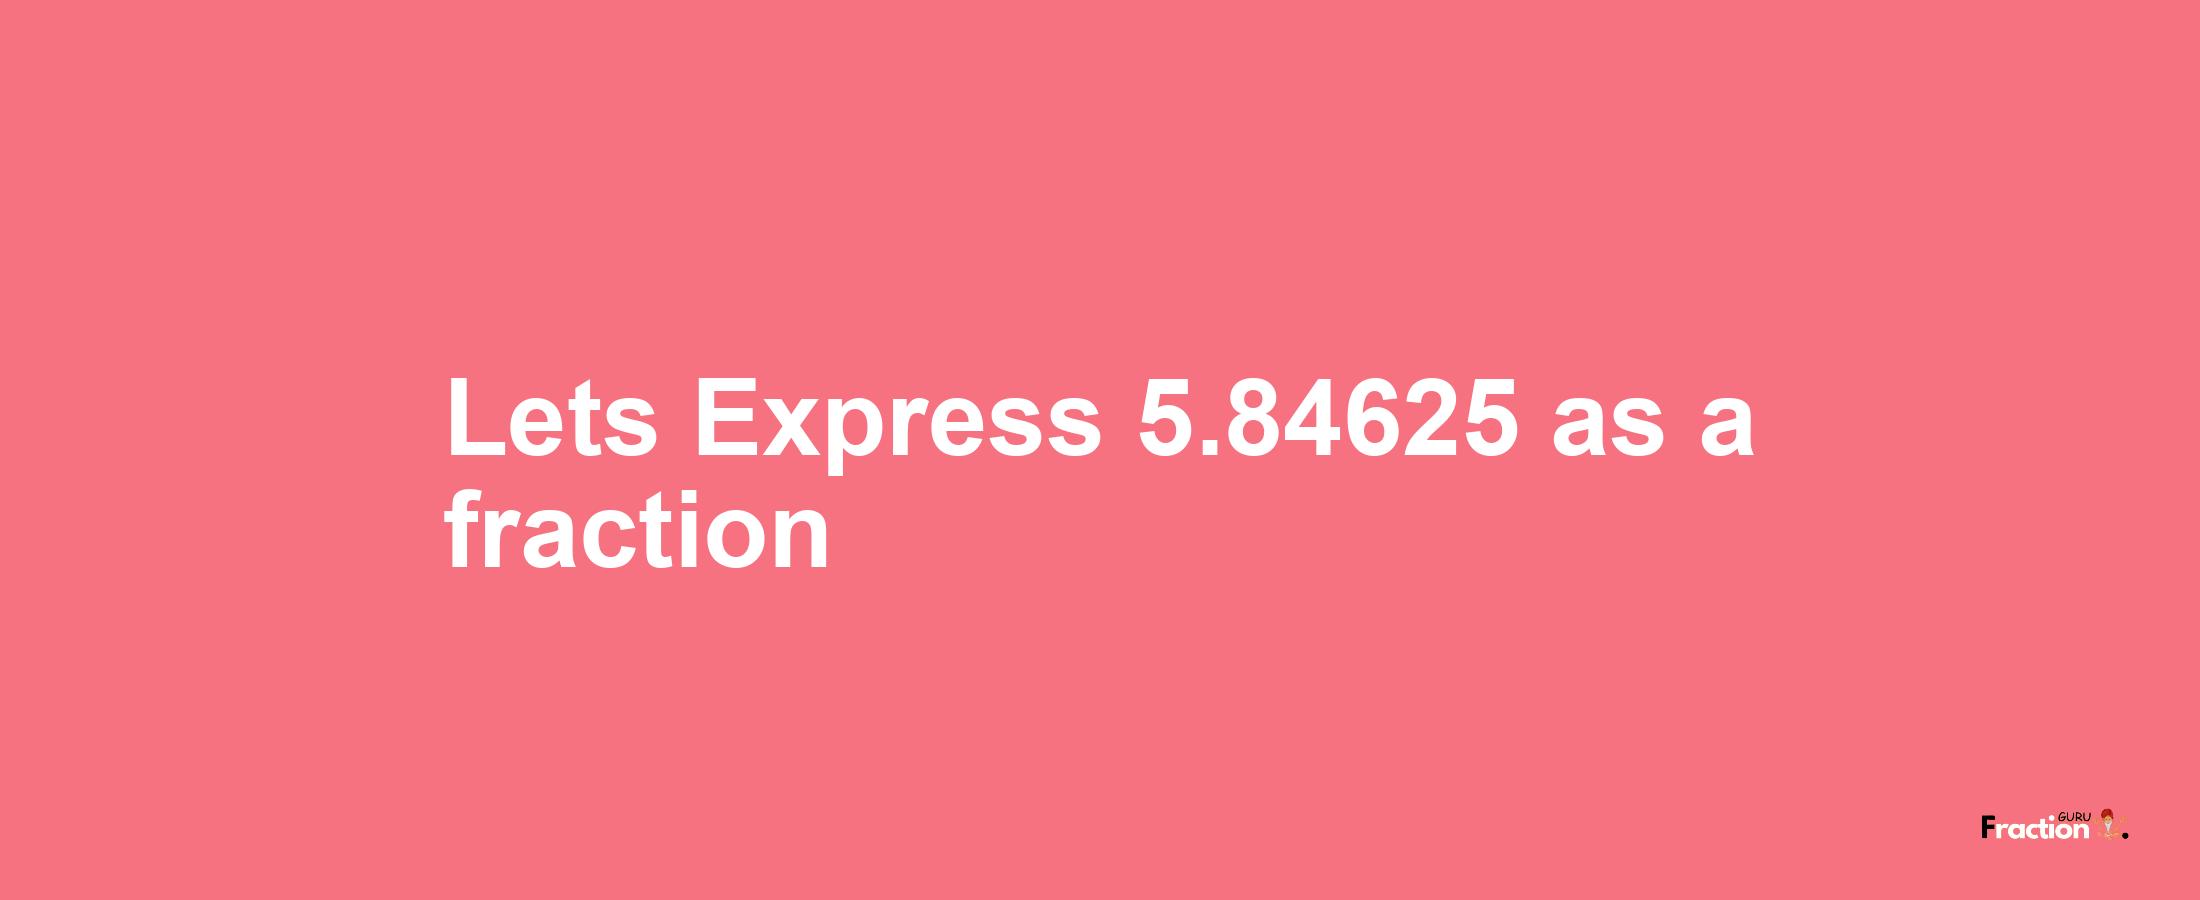 Lets Express 5.84625 as afraction